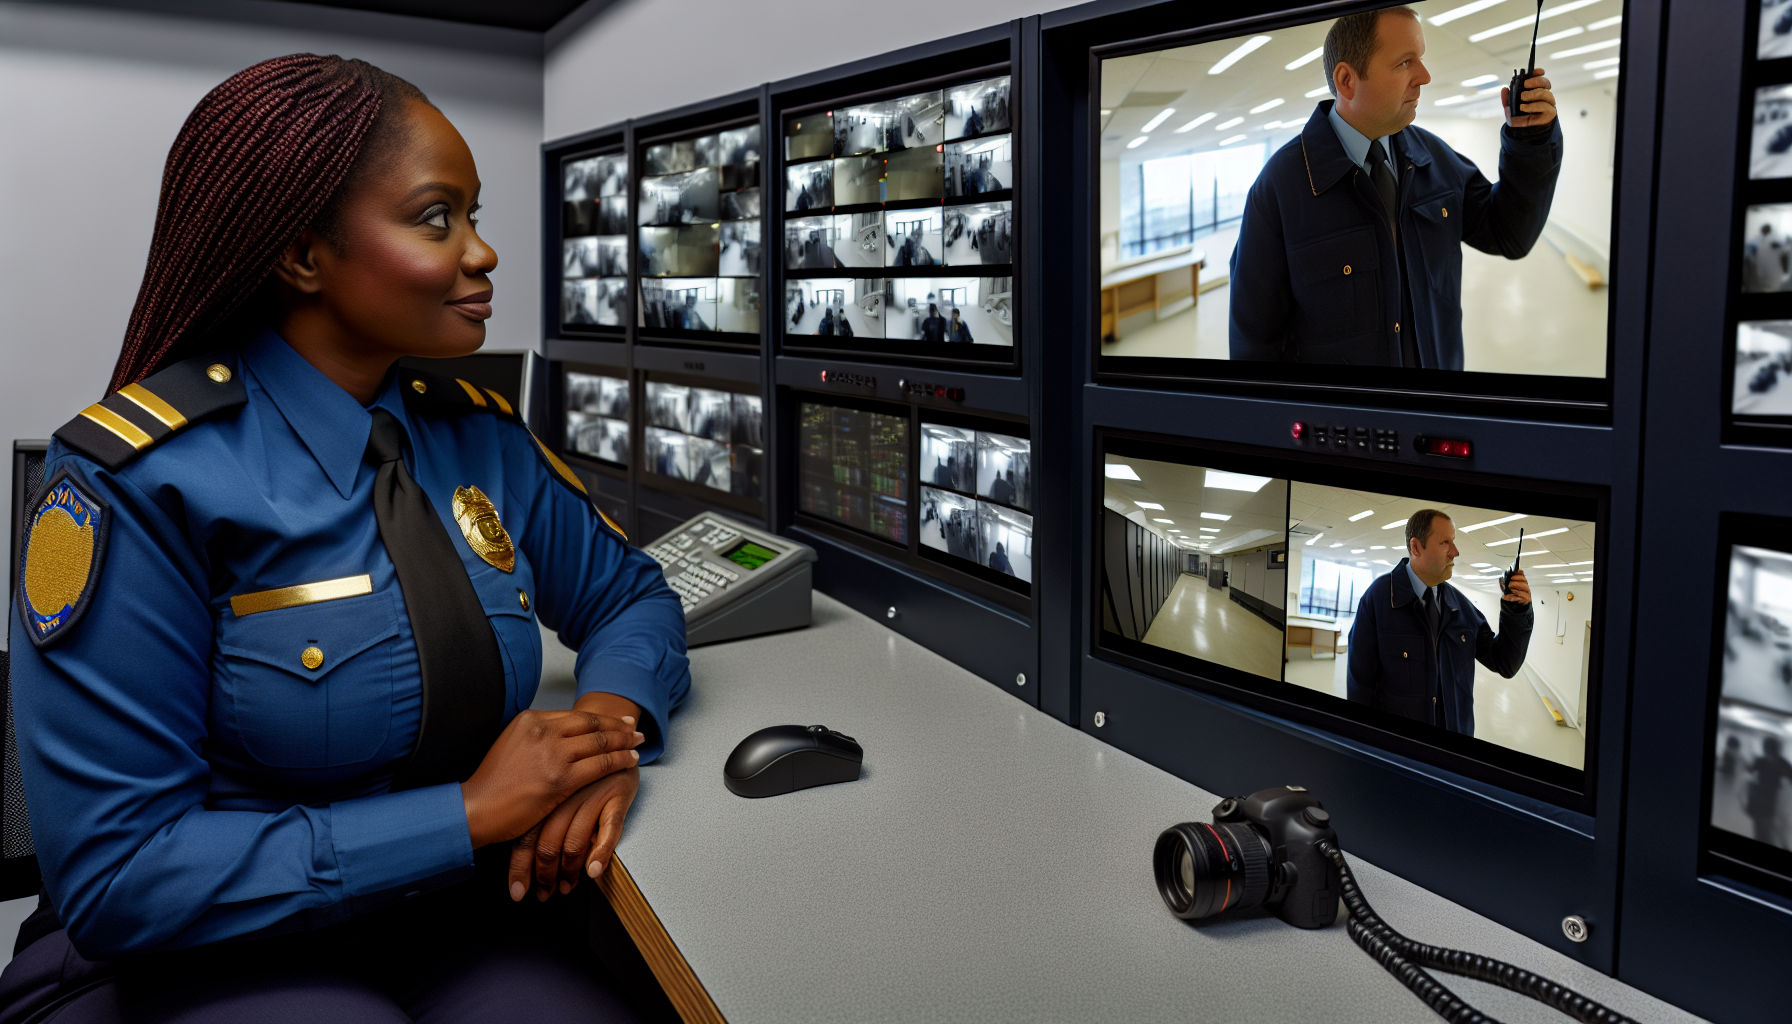 Comparison between live video monitoring and onsite security personnel